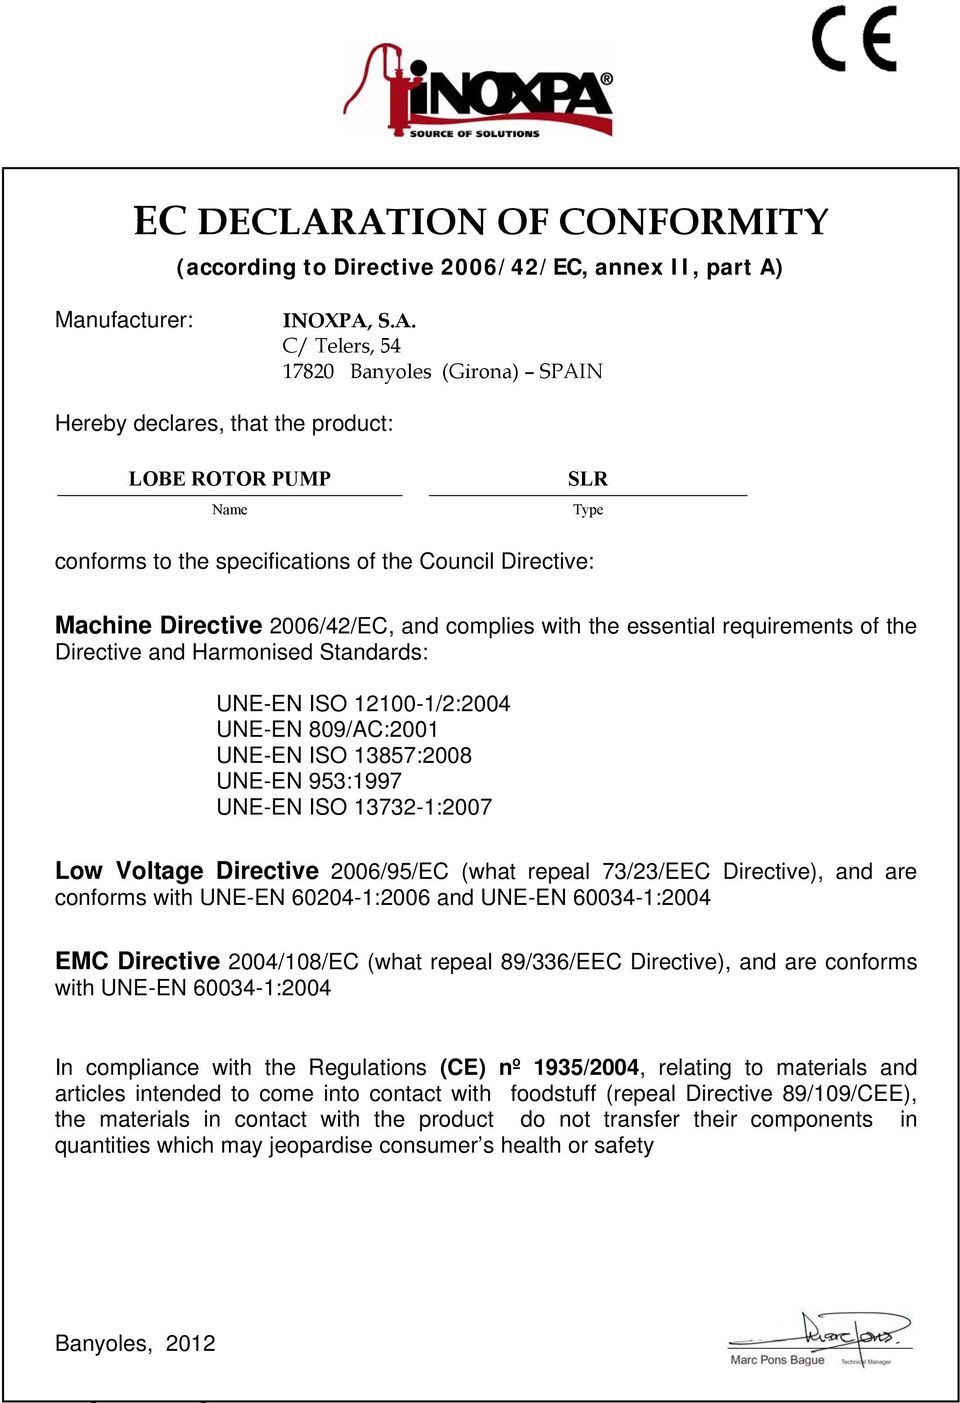 Name SLR Type conforms to the specifications of the Council Directive: Machine Directive 2006/42/EC, and complies with the essential requirements of the Directive and Harmonised Standards: UNE-EN ISO